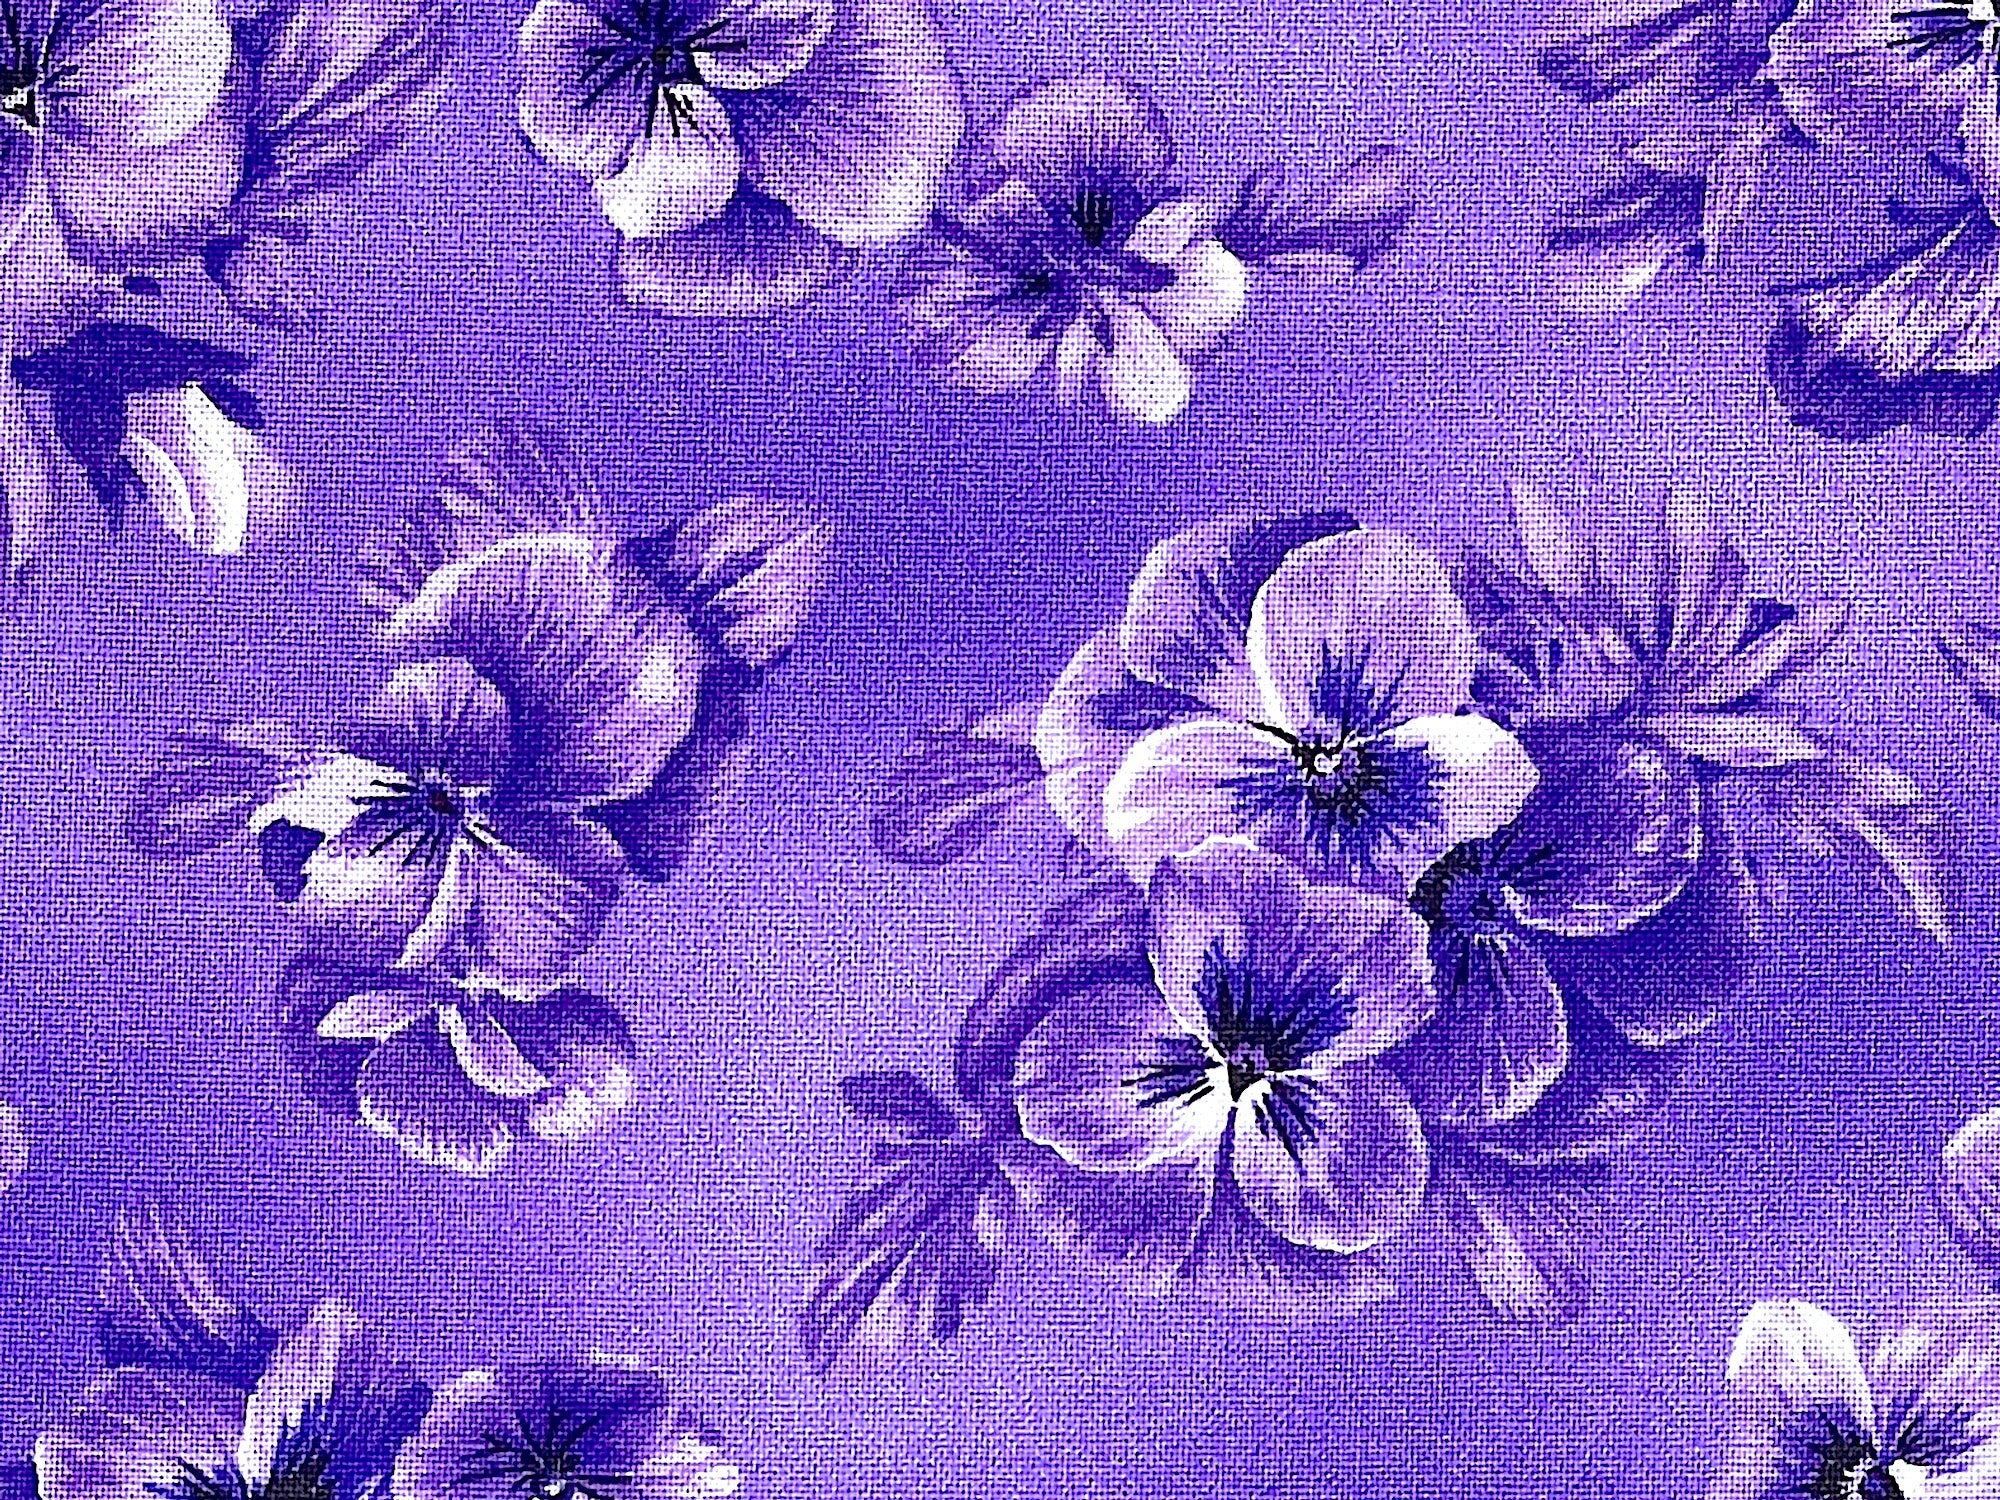 Close up of purple pansies on a purple background.